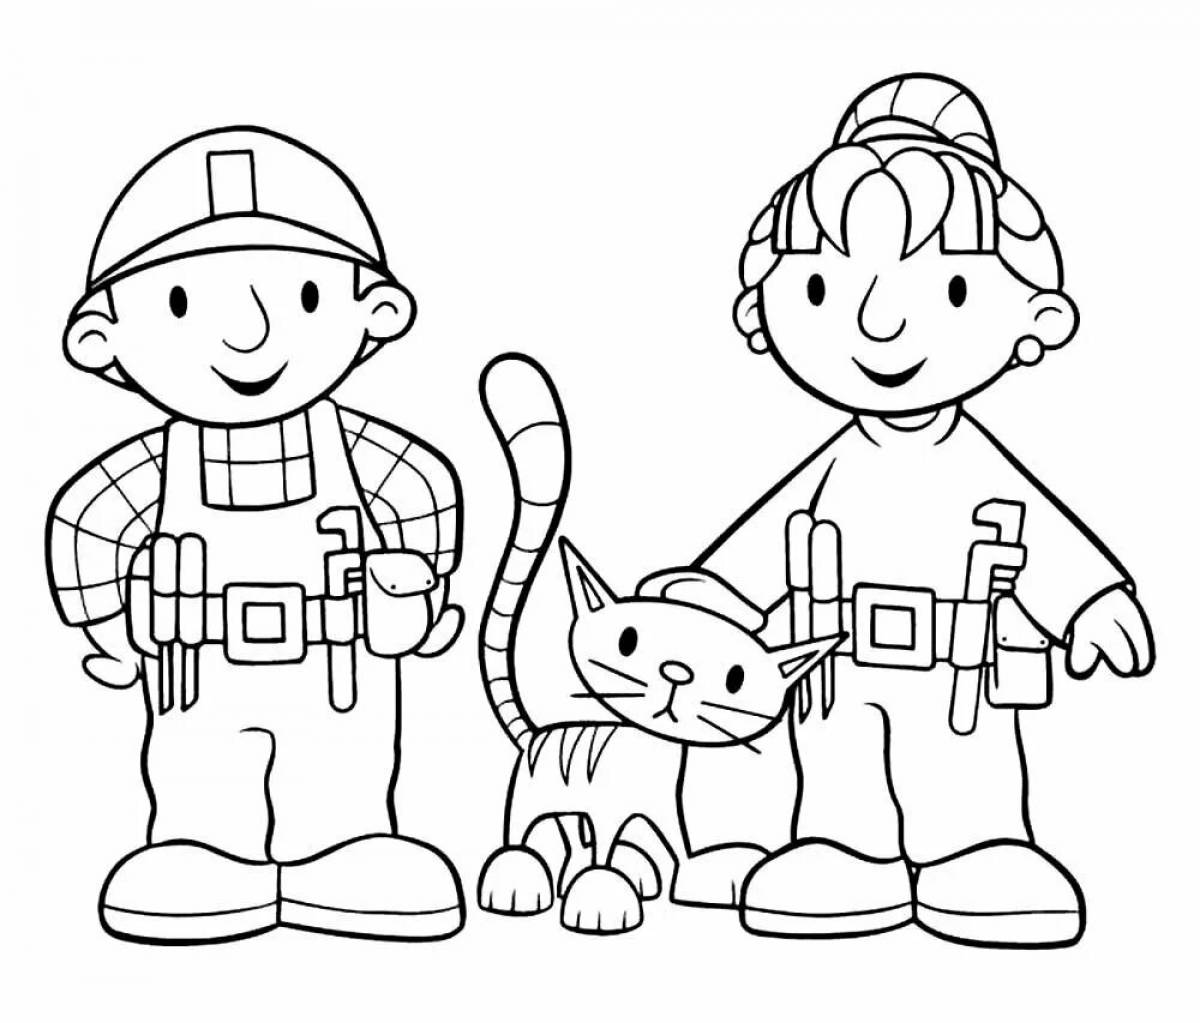 Occupational safety through the eyes of children for preschoolers #1